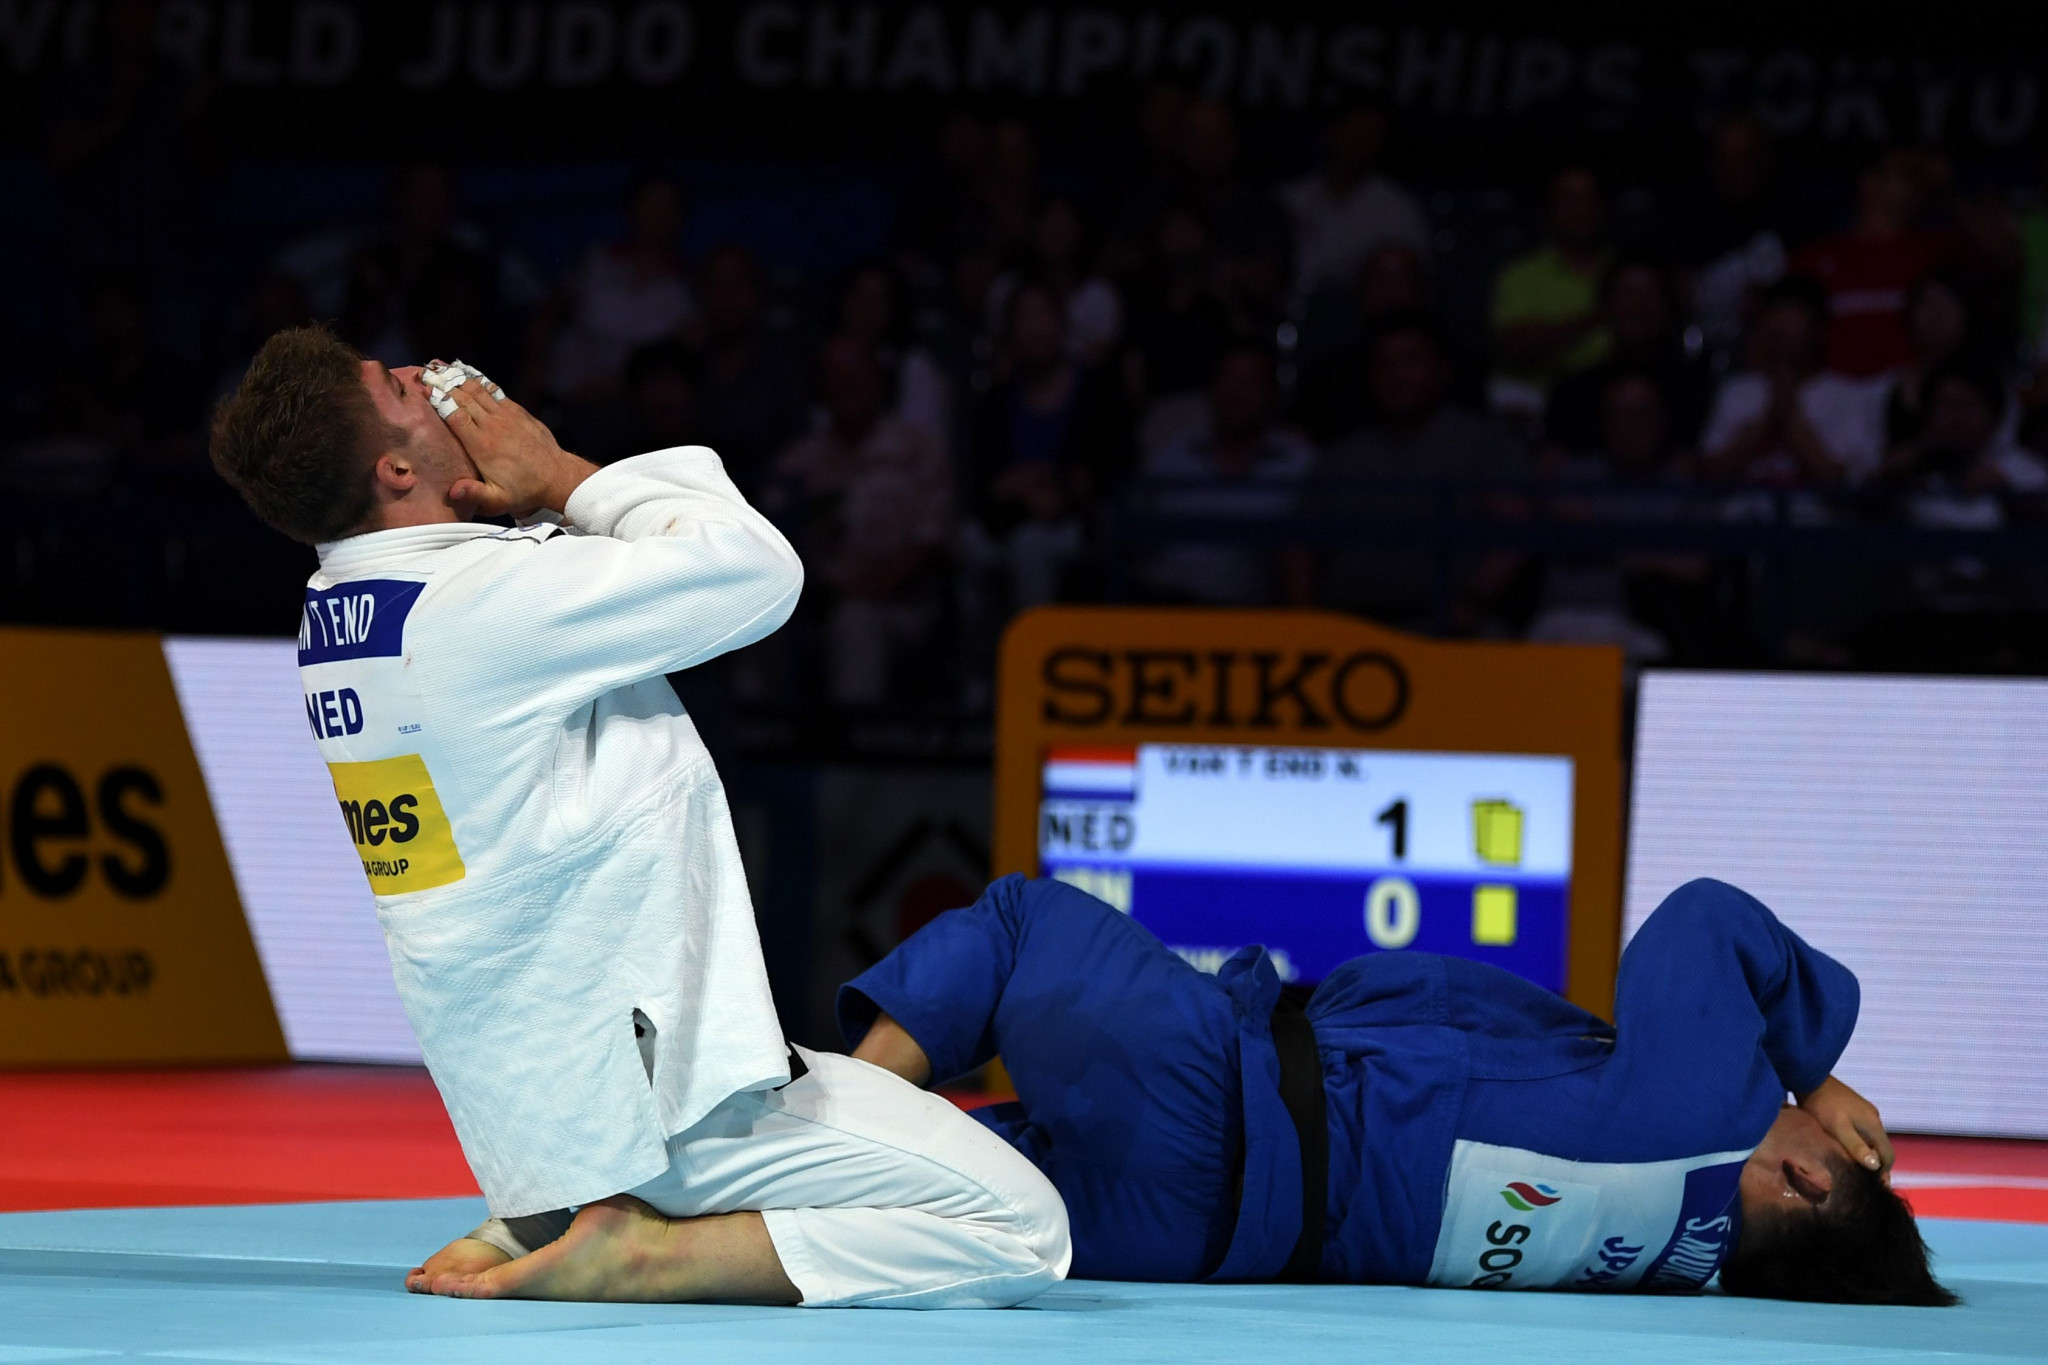 Noël van 't End celebrates his victory in the men's under-90kg at the World Judo Championships ©Getty Images